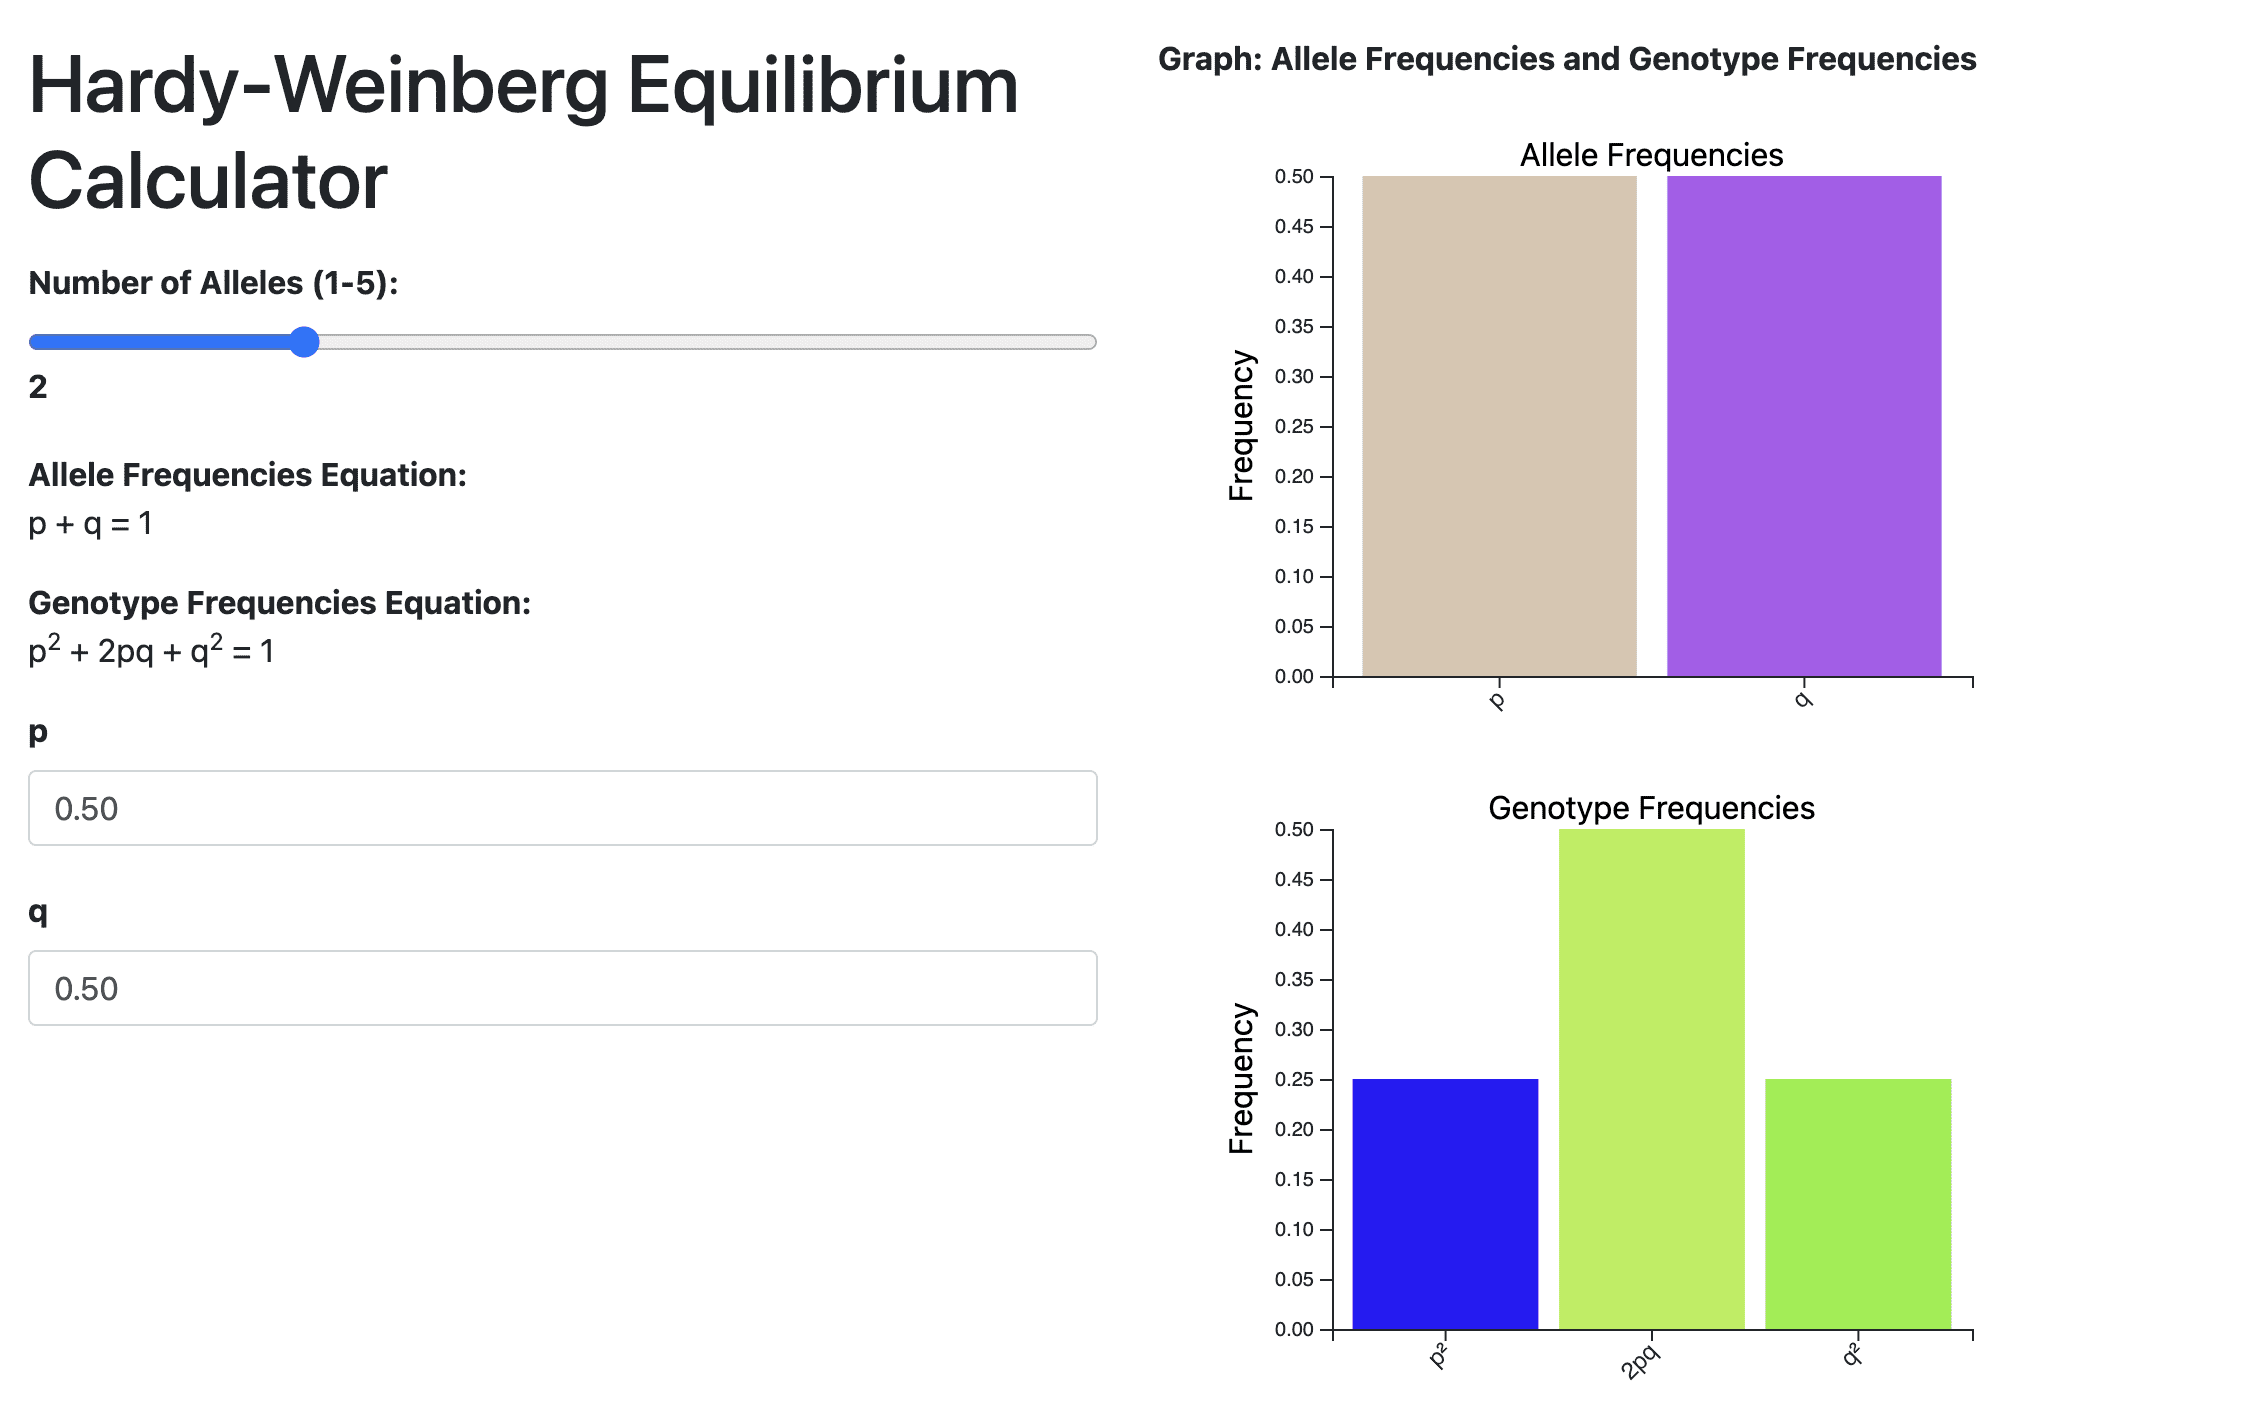 Hardy-Weinberg Equilibrium Calculator for 3 Alleles